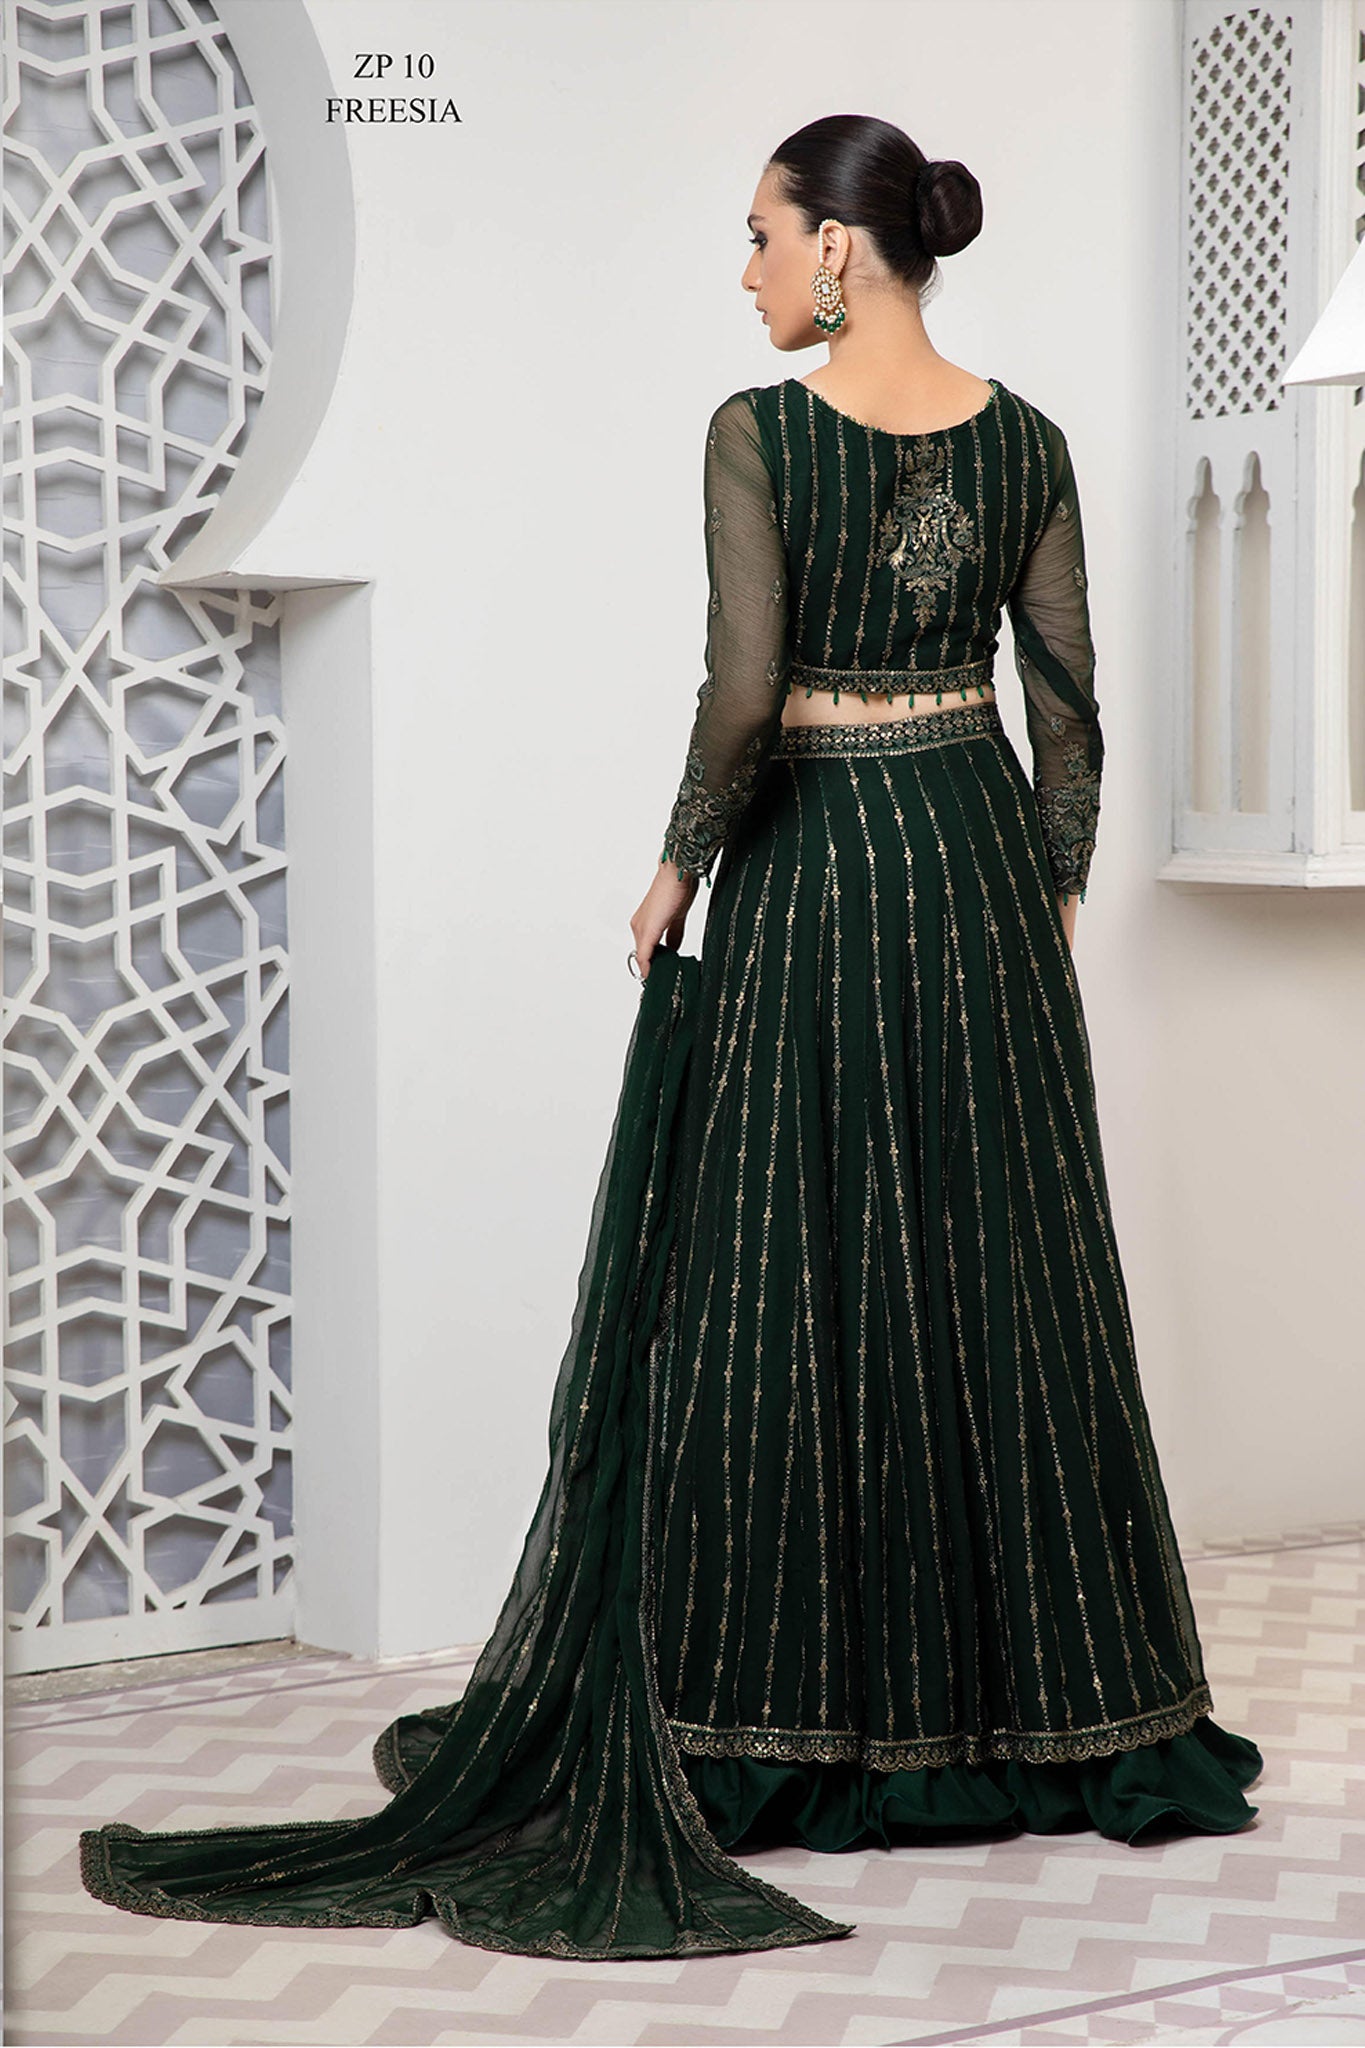 Preesia by Zarif Unstitched 3 Piece Luxury Formal Wear Collection'2022-ZP-10